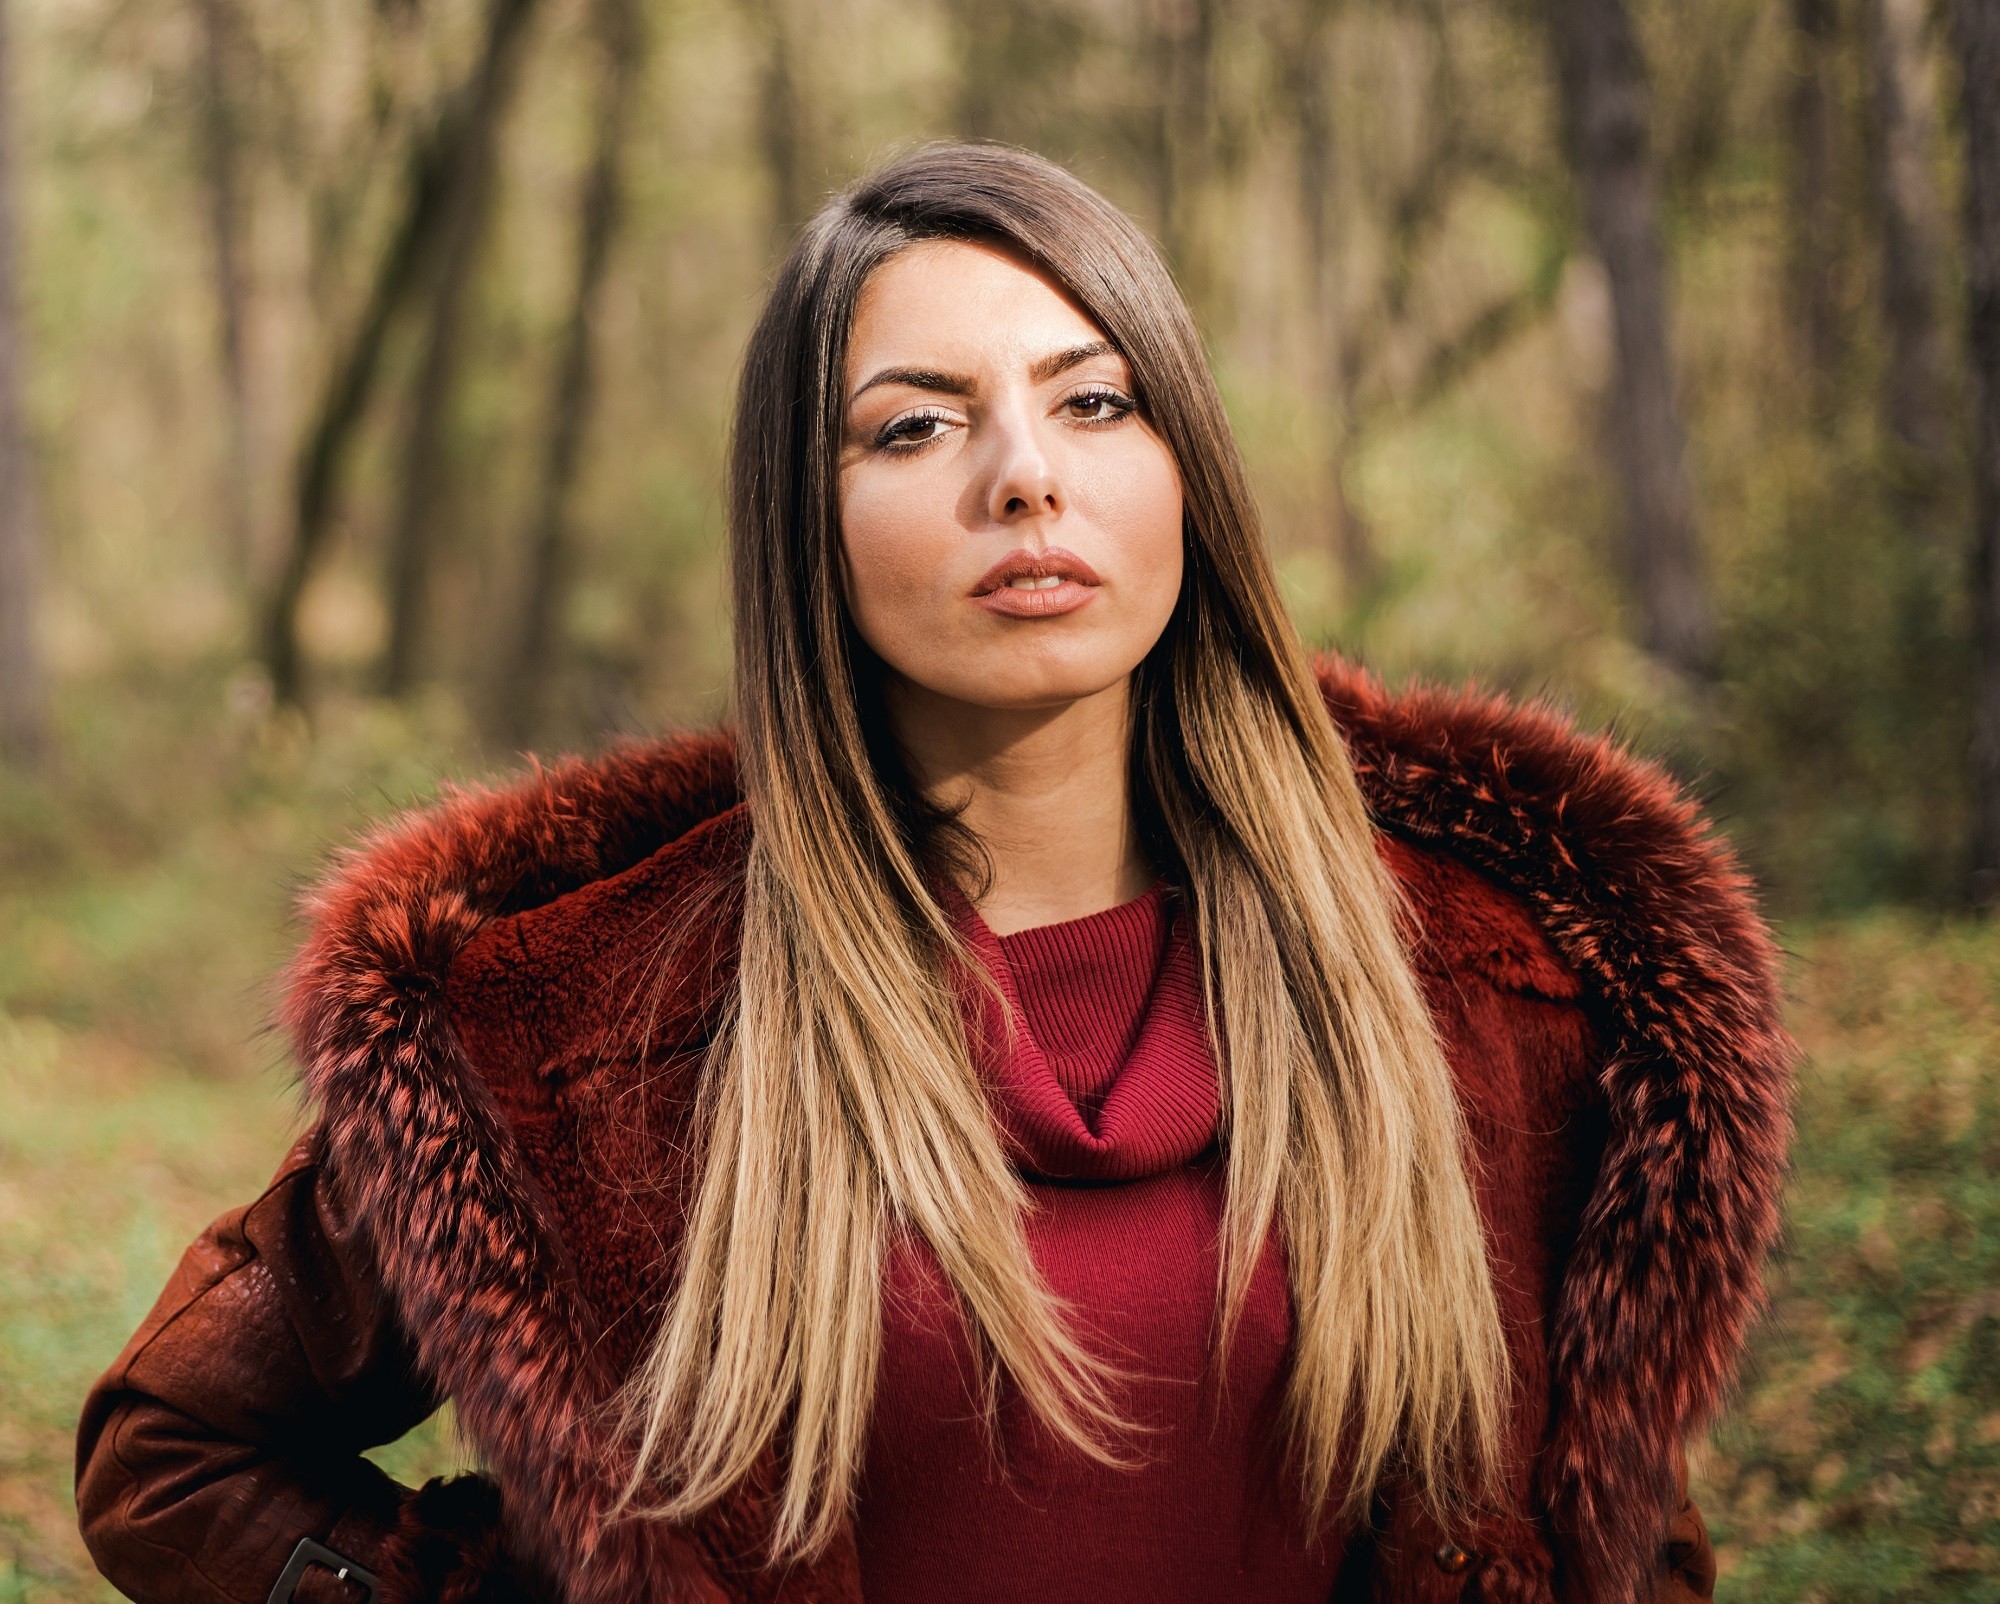 Brown ombre hair: Woman with ash brown and blonde hair wearing a red coat in a forest